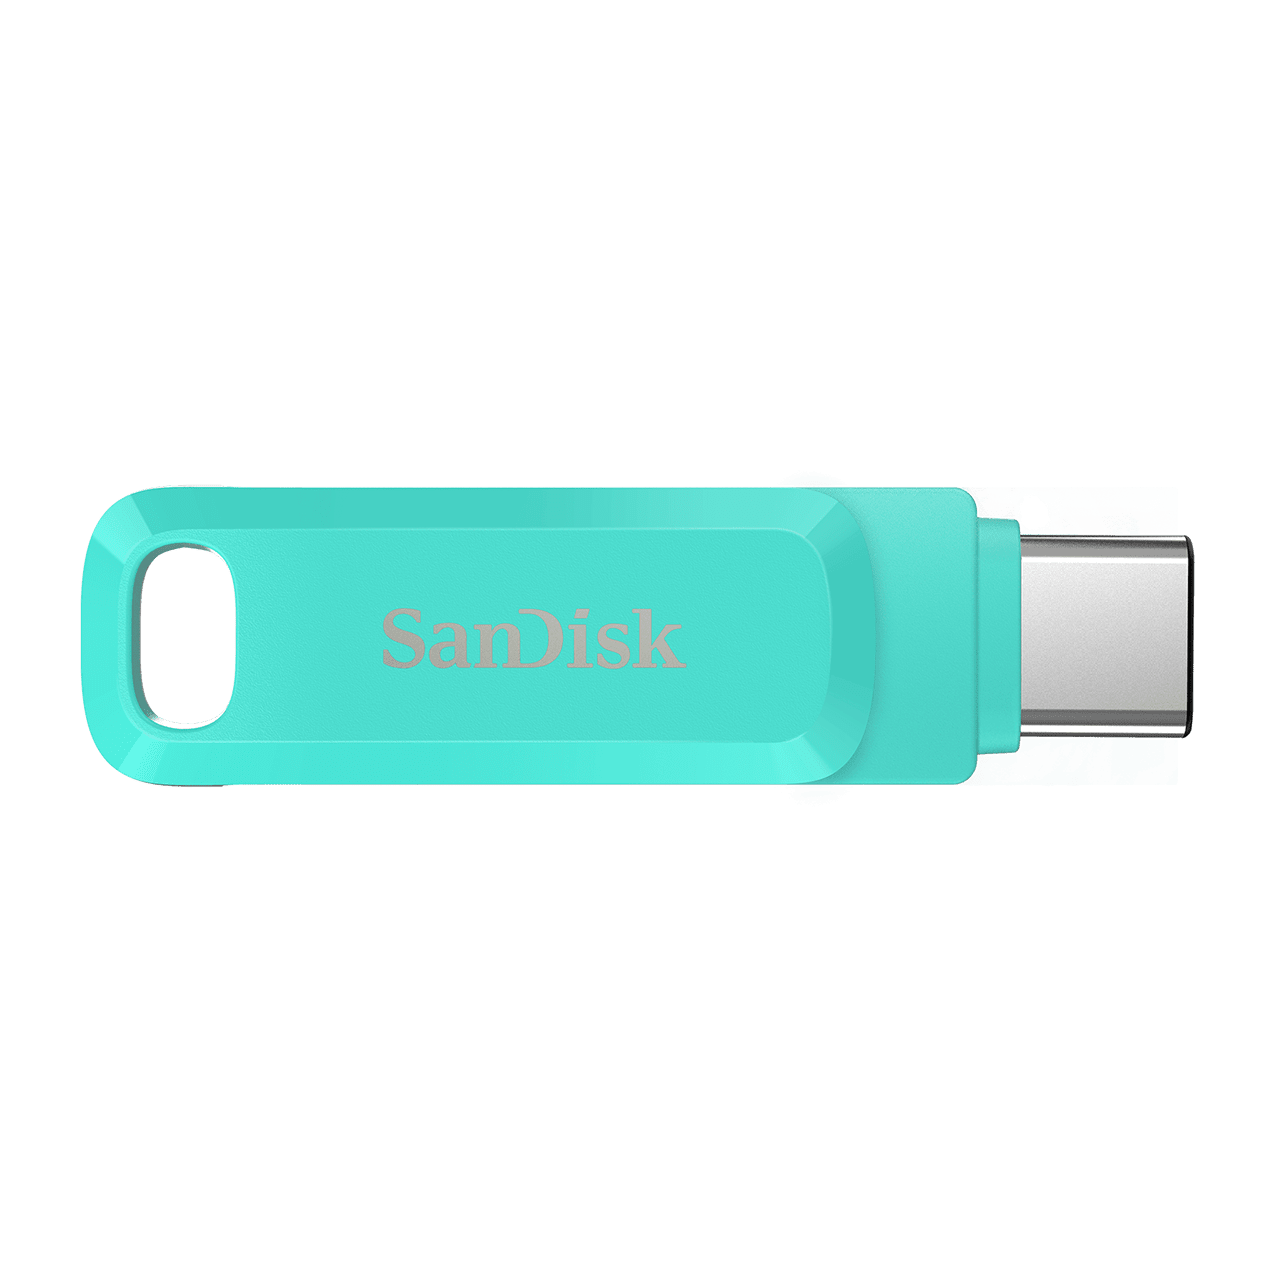 Sandisk OTG Ultra Dual Drive Go USB Type-C with 150MB/s Read, Plug and Play, Type-C Connection, USB 3.1, Swivel Design ( SDDDC3 Series)